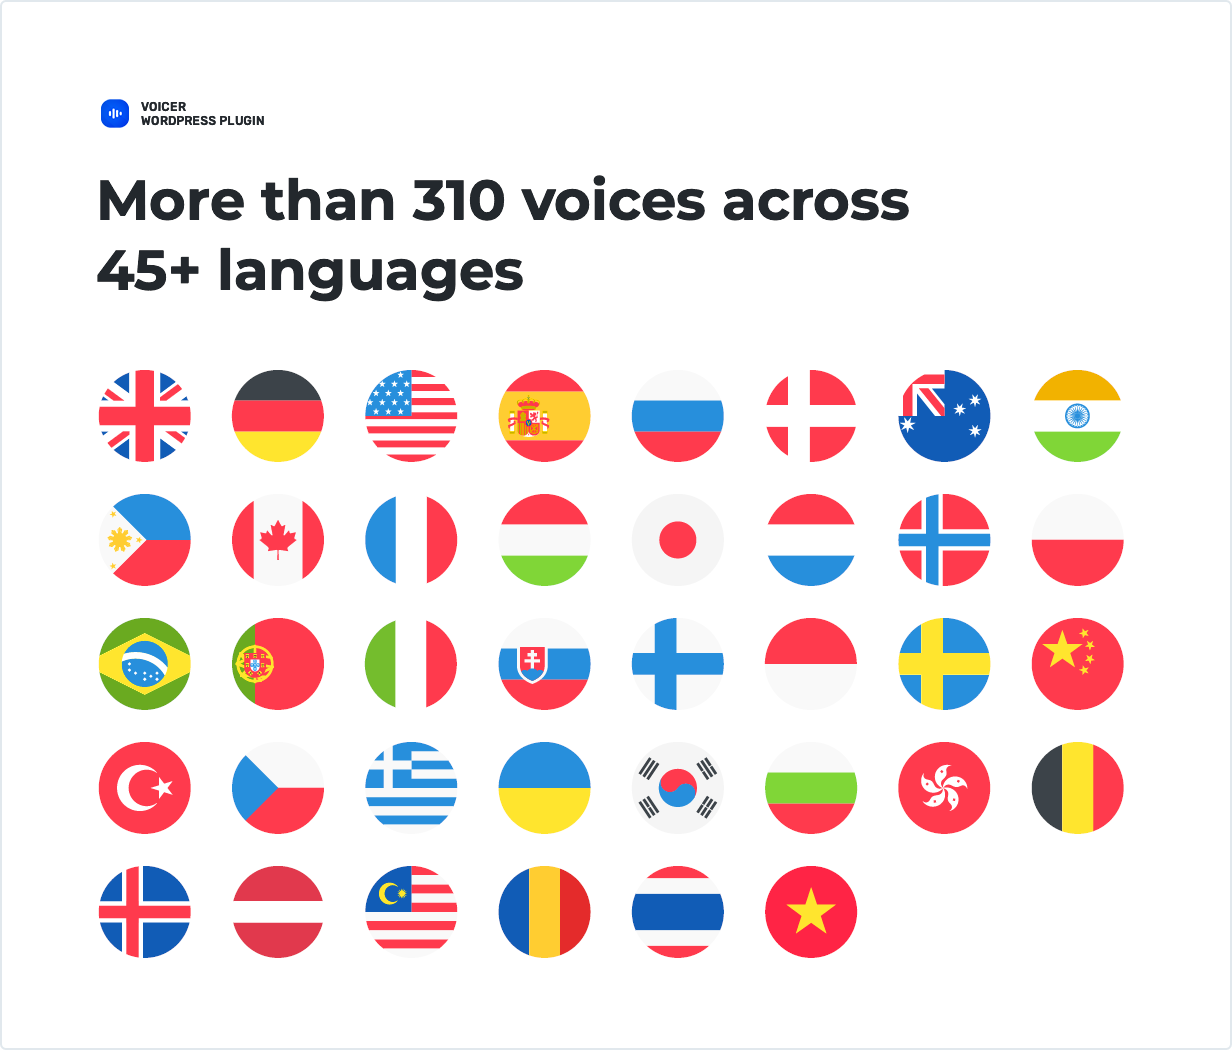 More than 310 voices across 45+ languages